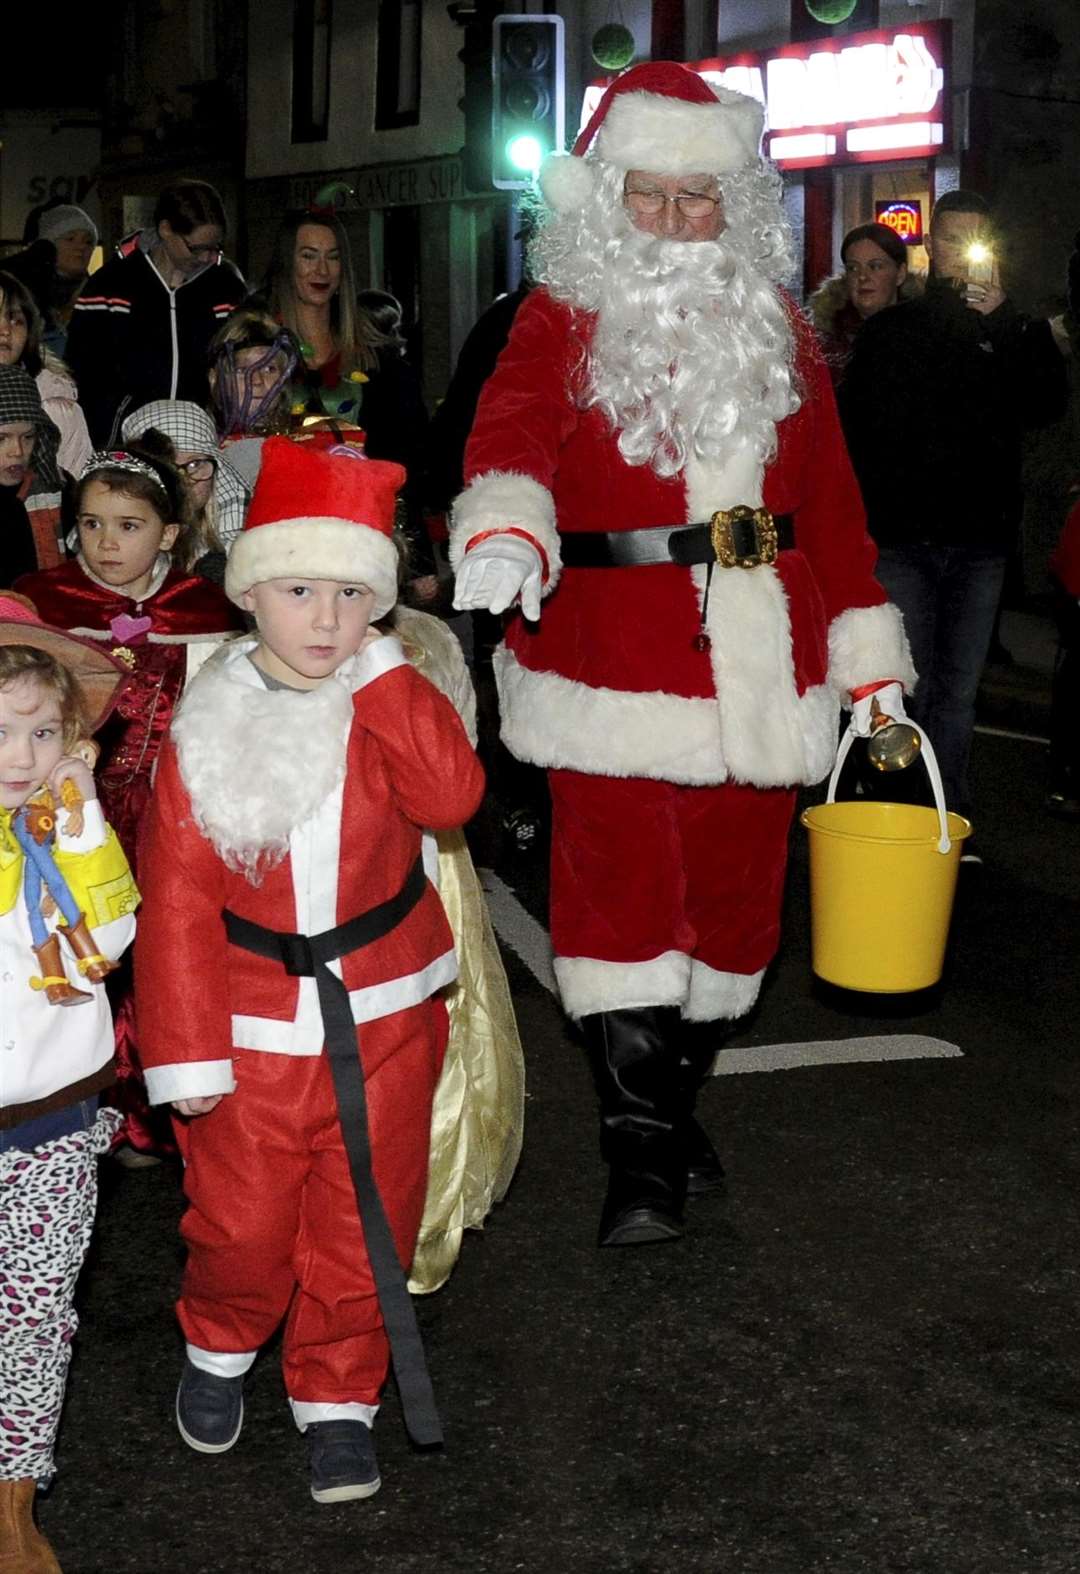 Santa leading the switch-on parade through the high street.